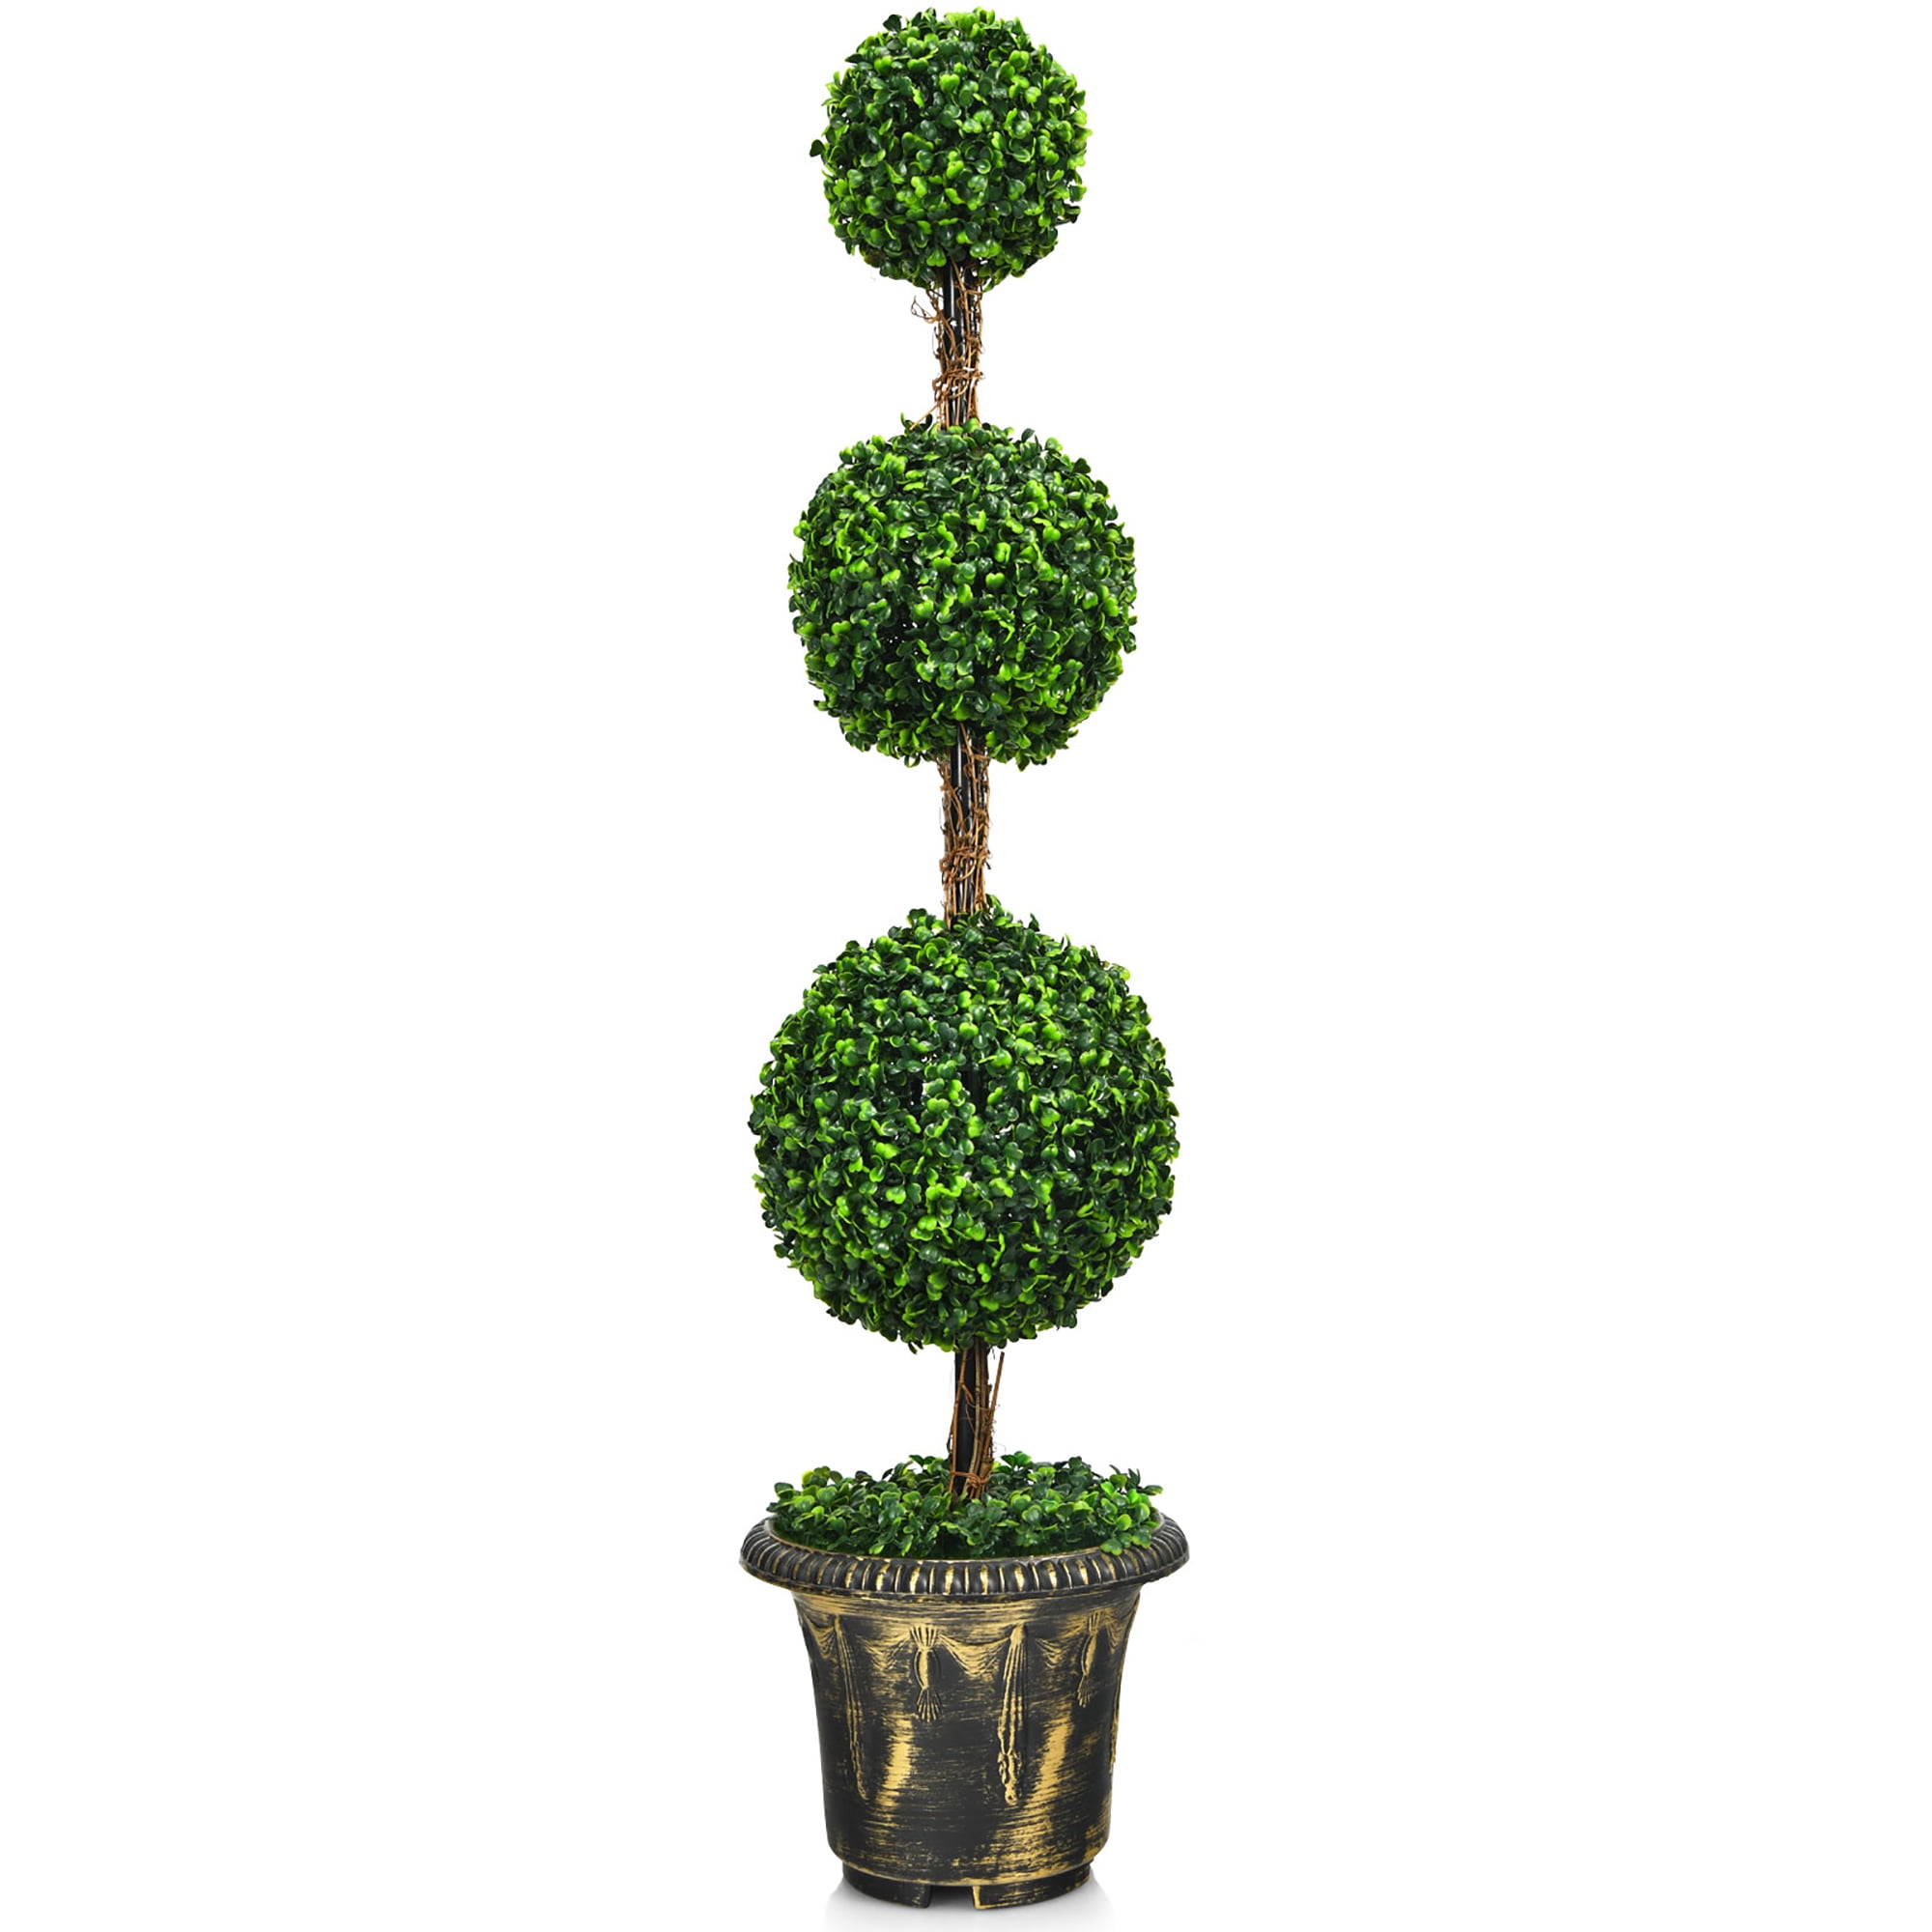 112cm Outsunny Set of 2 Artificial Boxwood Ball Topiary Trees Potted Decorative Plant Outdoor and Indoor Décor